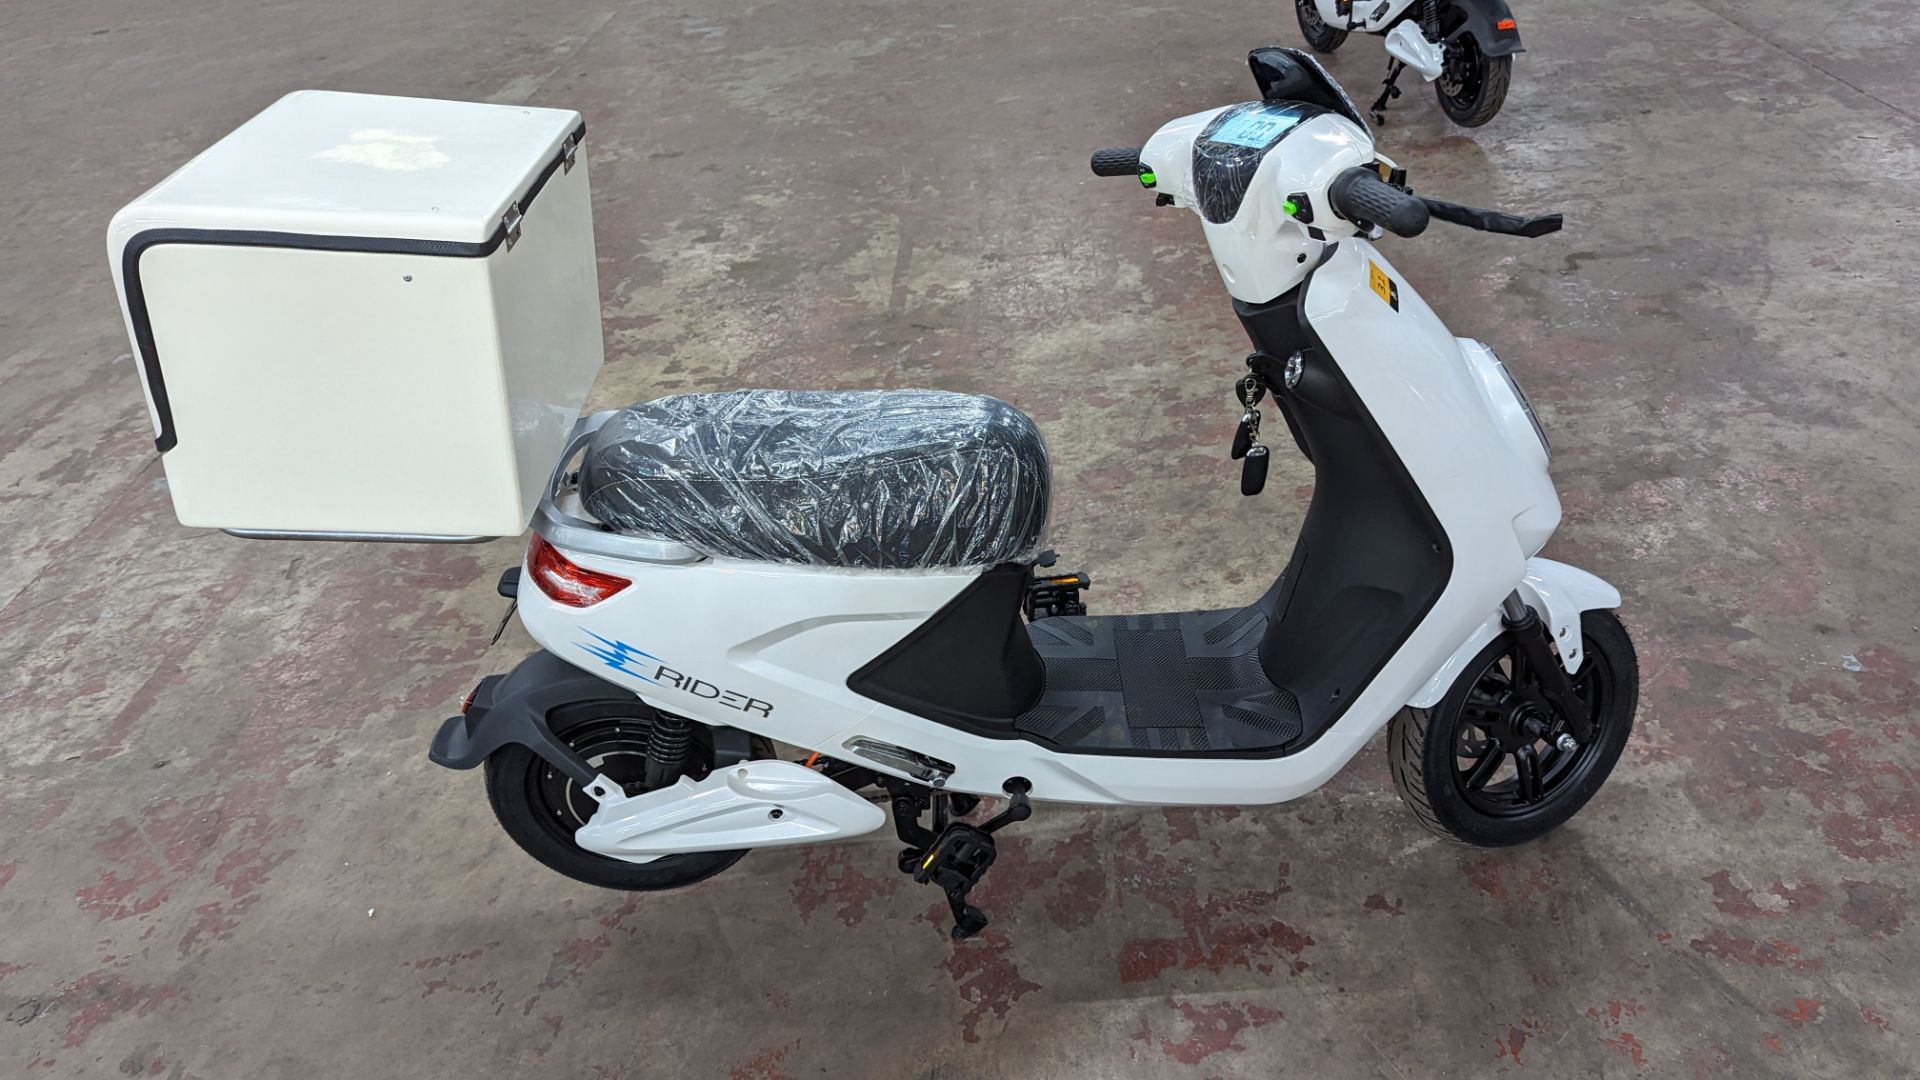 Model 18 Electric Bike: Zero (0) recorded miles, white body with black detailing, insulated box moun - Image 7 of 15